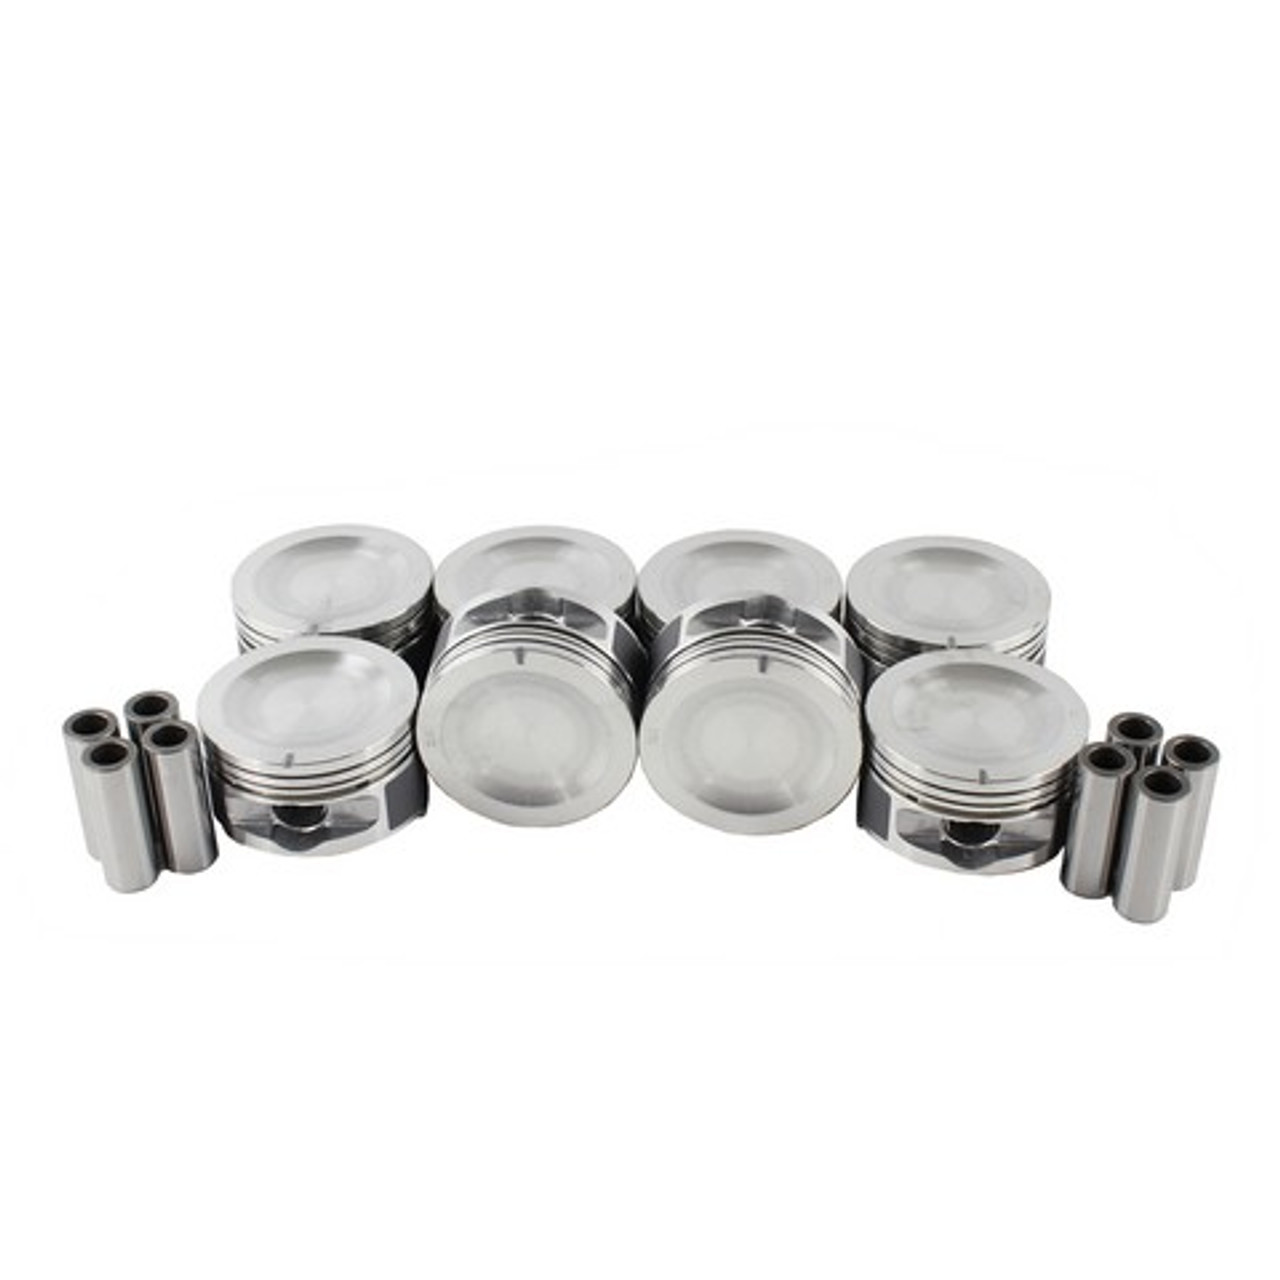 Piston Set 4.6L 2000 Ford Expedition - P4150.17